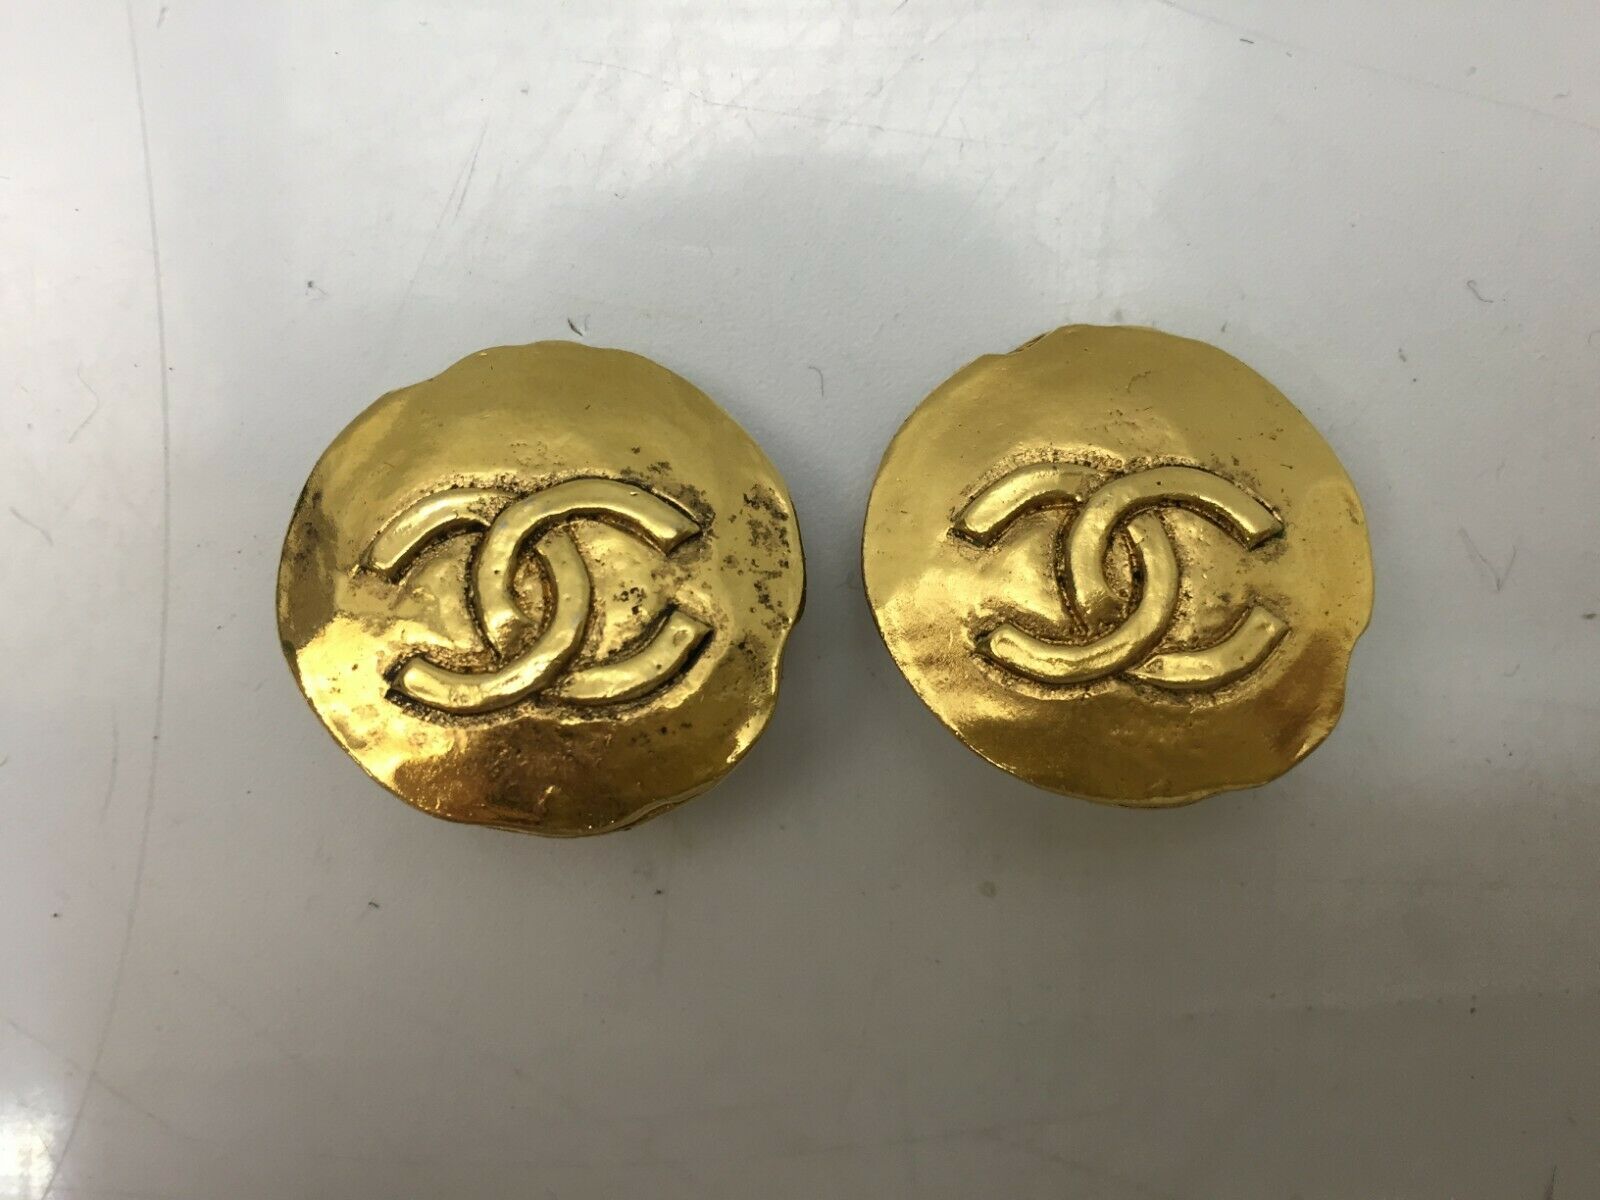 Auth CHANEL Gold Tone CC logo Earrings 9F180100h - Tokyo Vintage Store